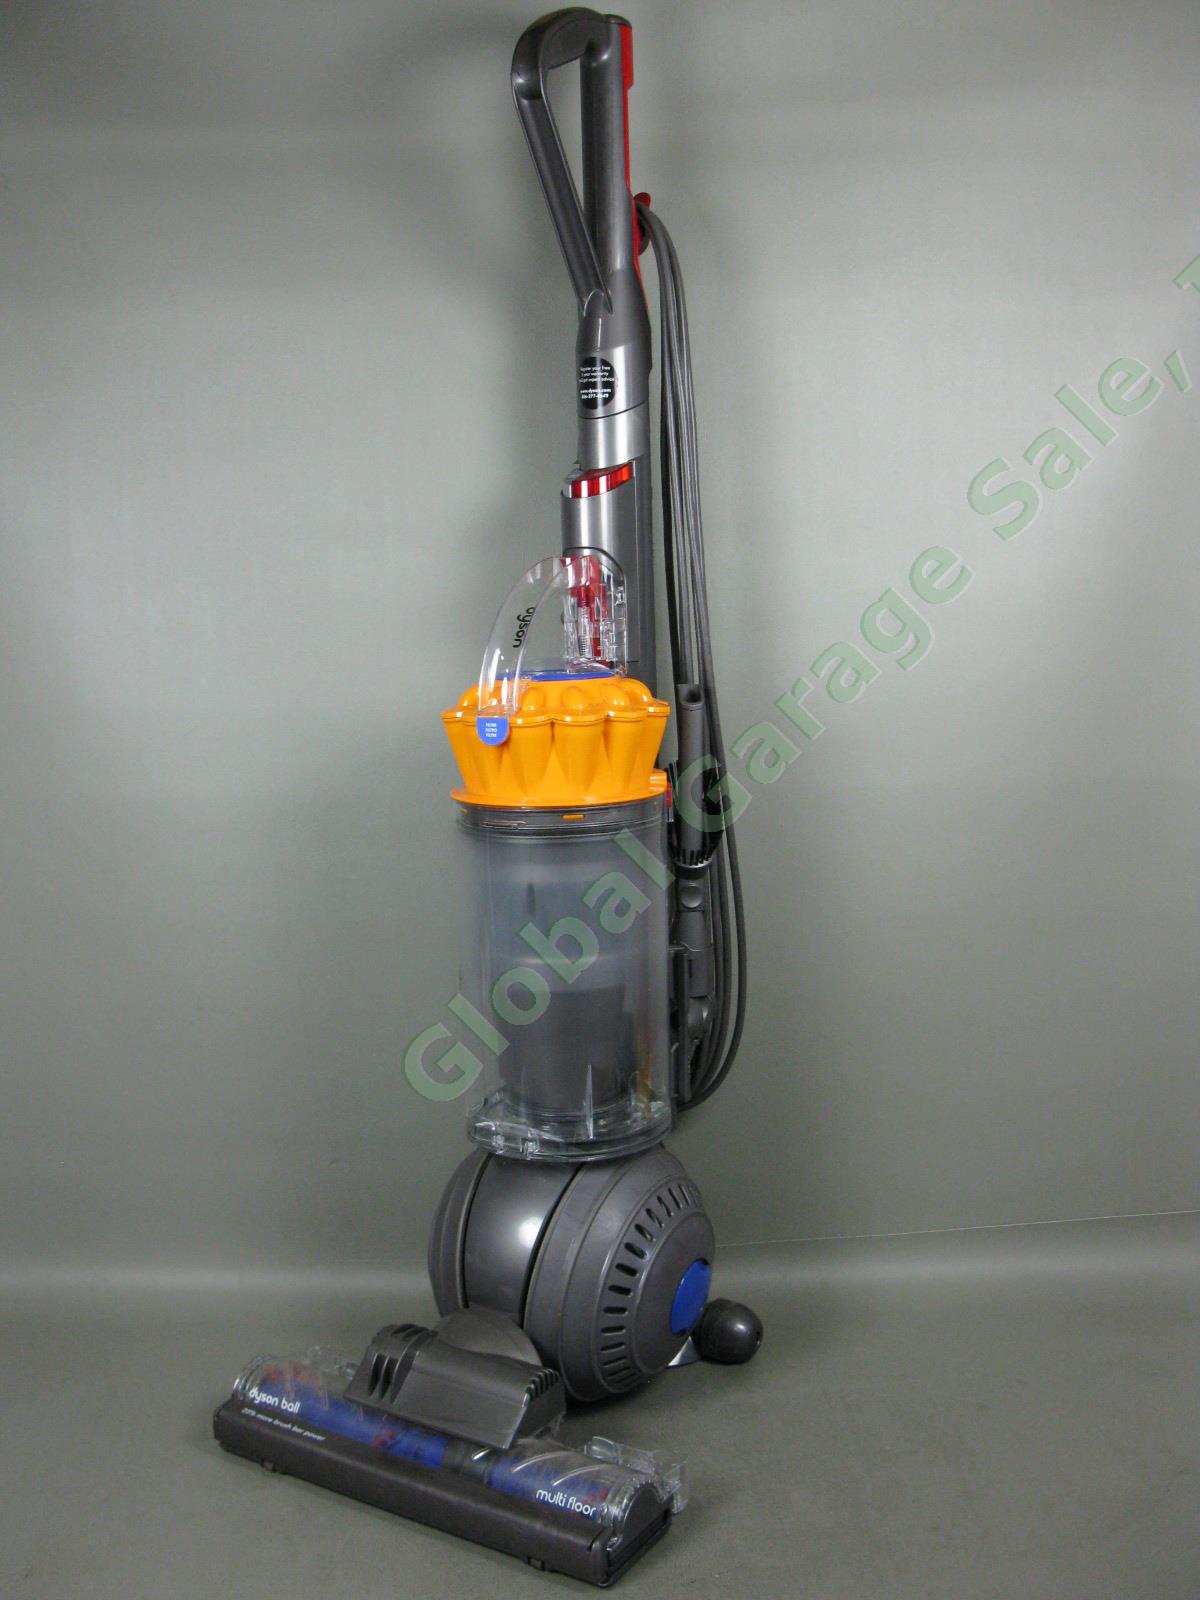 Dyson UP13 Multi Floor Ball Bagless Upright Vacuum Cleaner W/ Manual $400 Retail 1